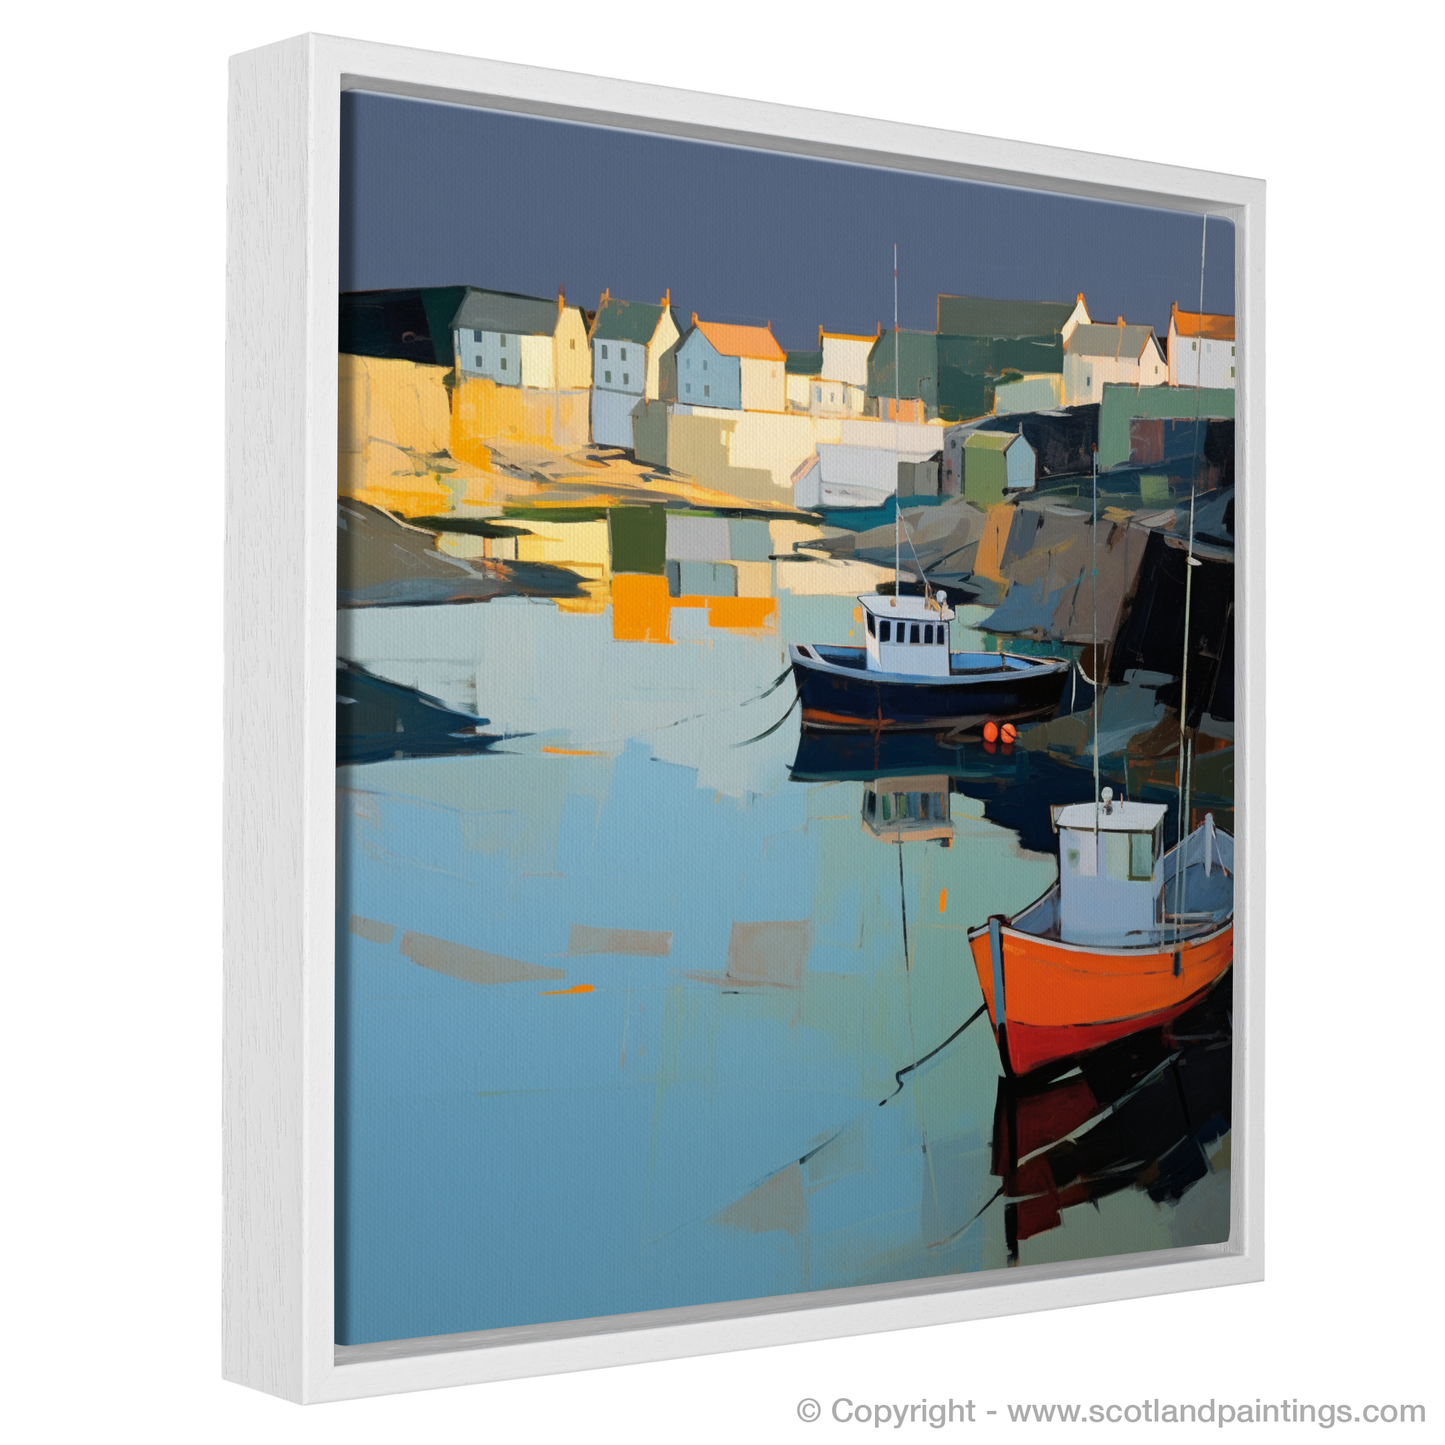 Dusk at Portnahaven Harbour: A Contemporary Symphony of Light and Shadow